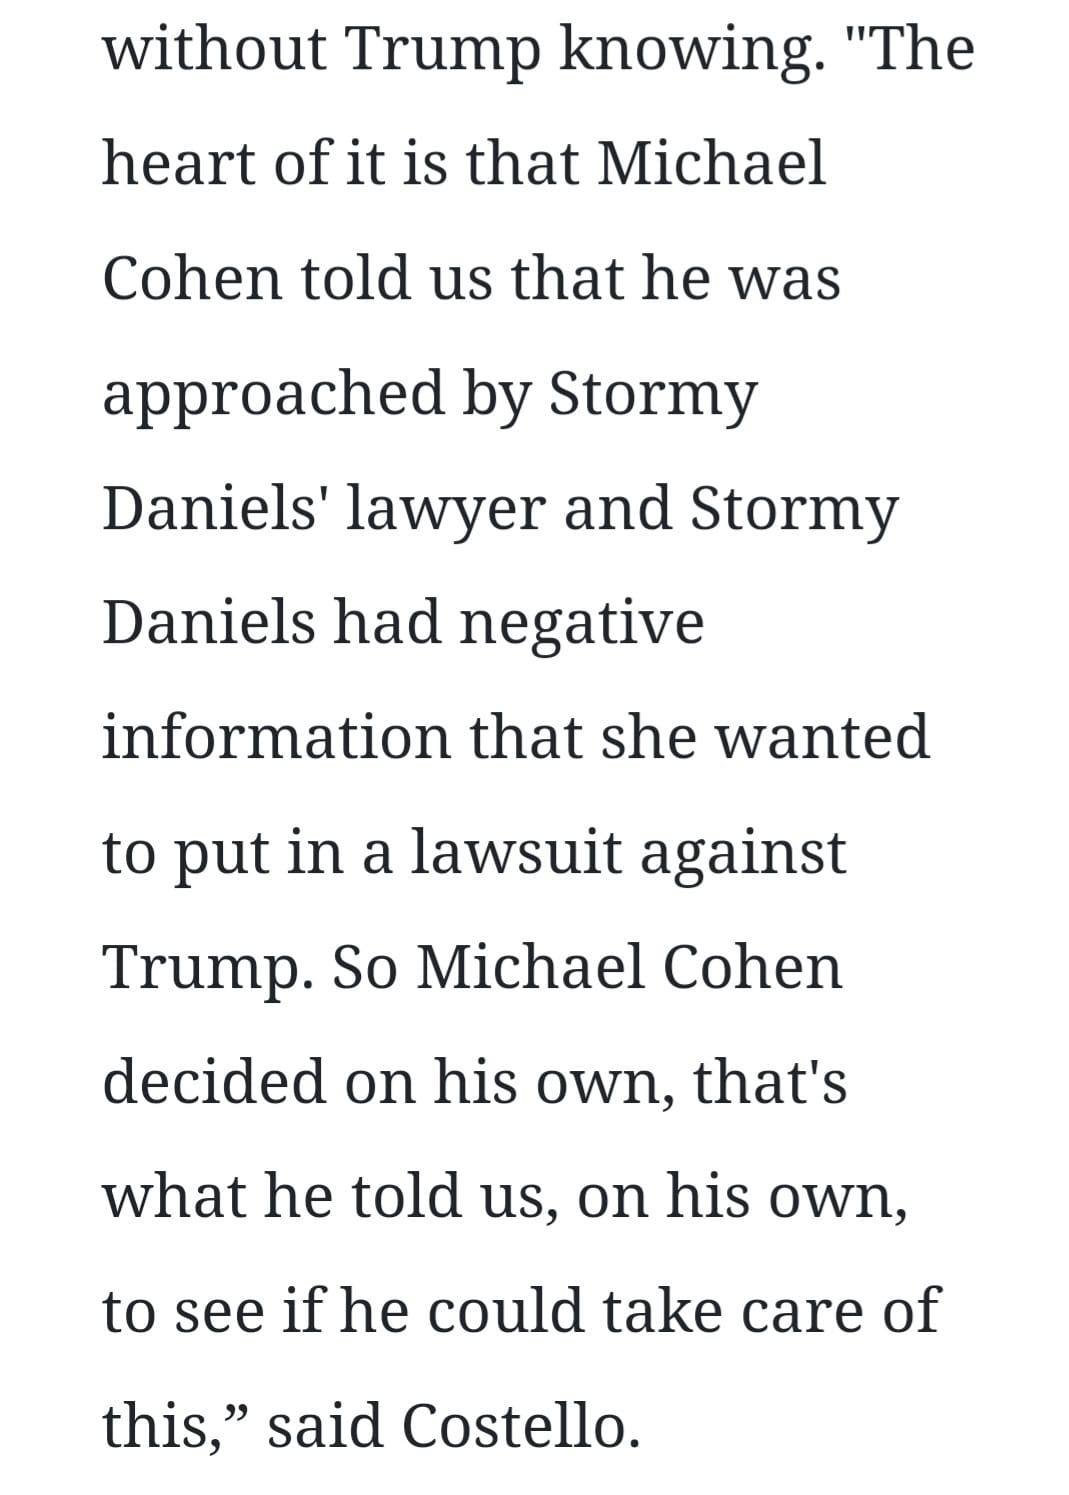 May be an image of text that says 'without Trump knowing. "The heart of it is that Michael Cohen told us that he was approached by Stormy Daniels' lawyer and Stormy Daniels had negative information that she wanted to put in a lawsuit against Trump. So Michael Cohen decided on his own, that's what he told us, on his own, to see if he could take care of this," said Costello.'